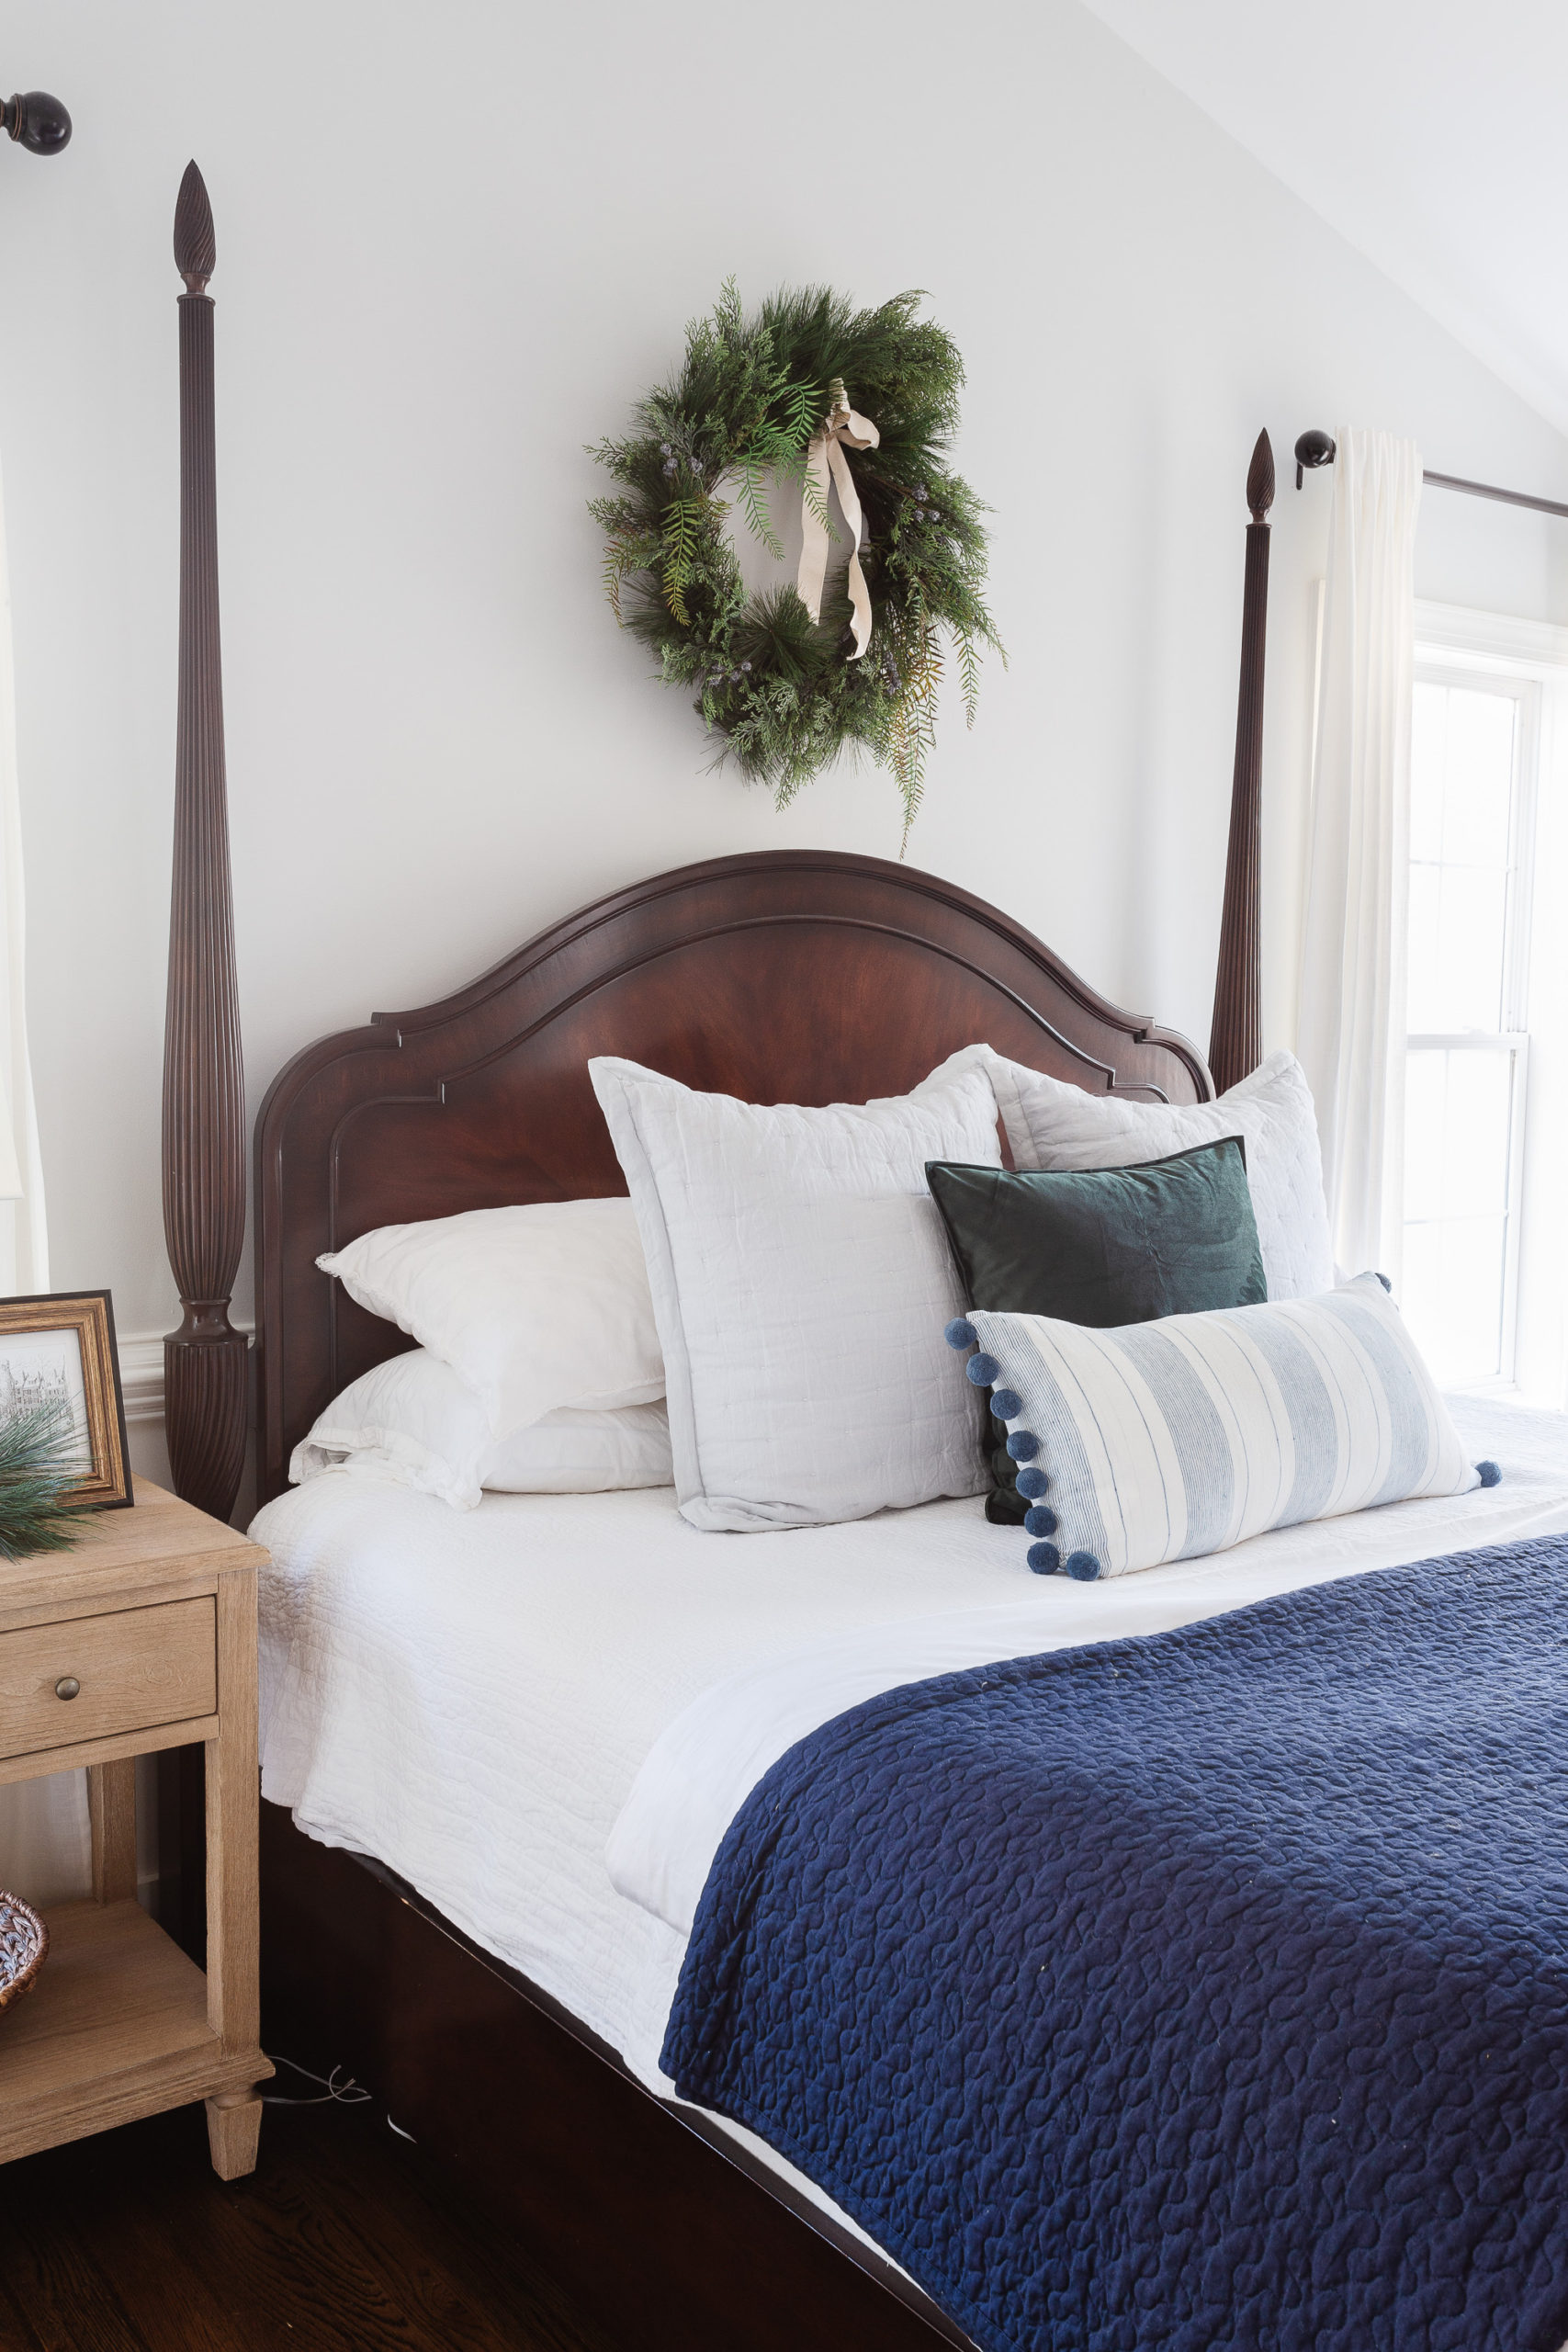 Poster bed with blue quilt and wreath on wall in bedroom